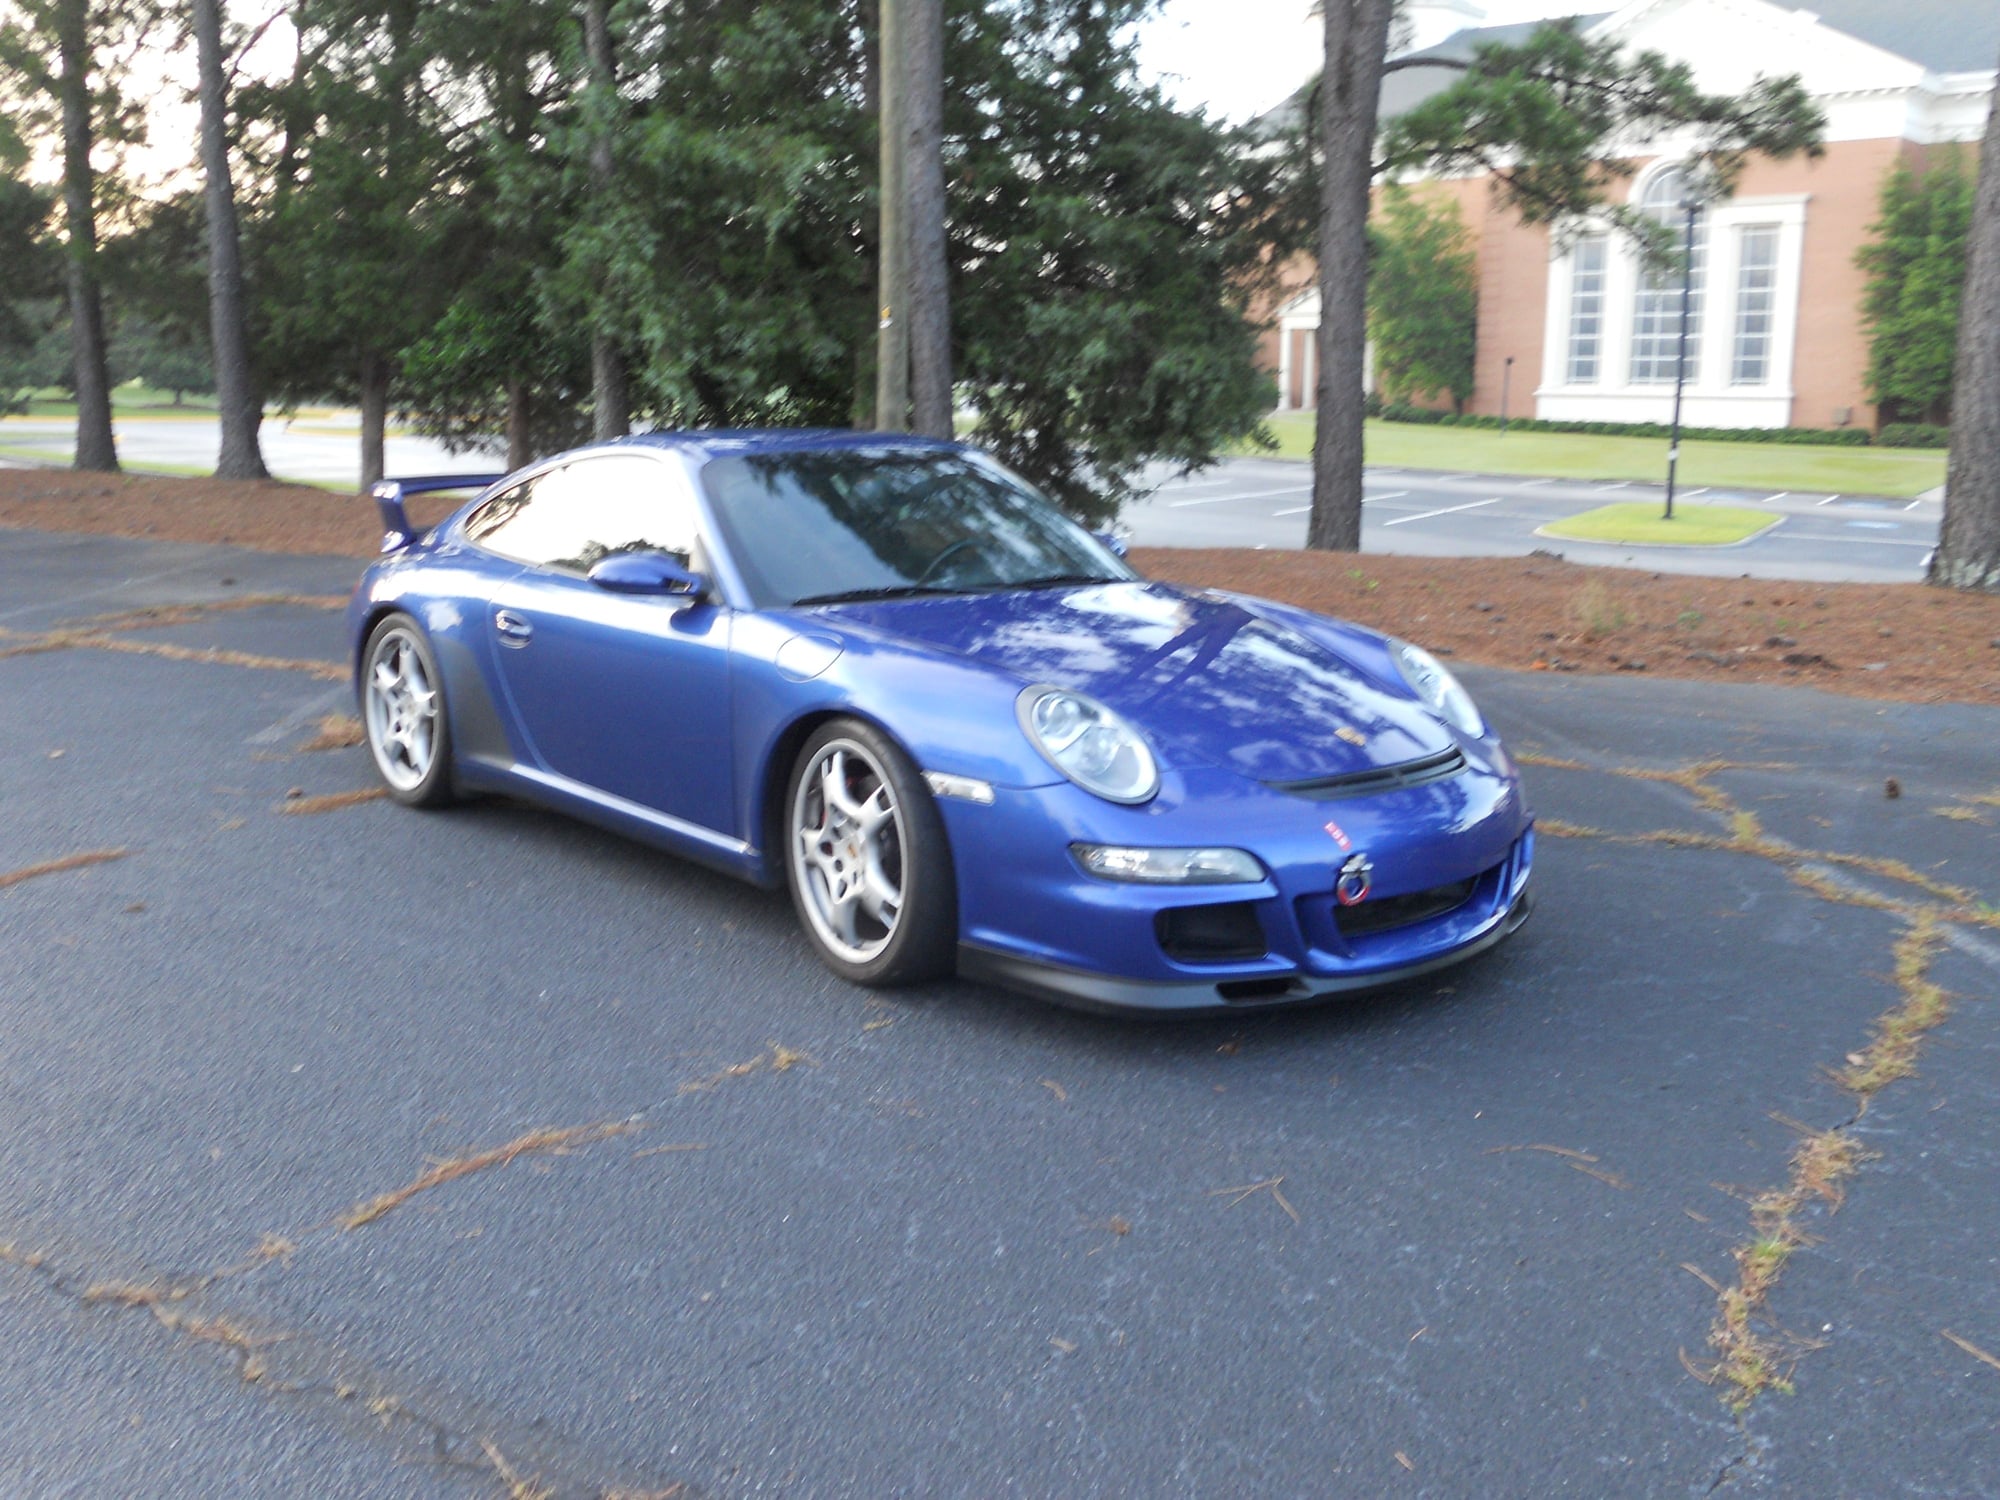 2006 Porsche 911 - cobolt blue C2s 997.1 2006   lots of goodies street or track - Used - VIN WP0ab29956S741267 - 37,000 Miles - 6 cyl - 2WD - Manual - Coupe - Blue - Augusta, GA 30909, United States